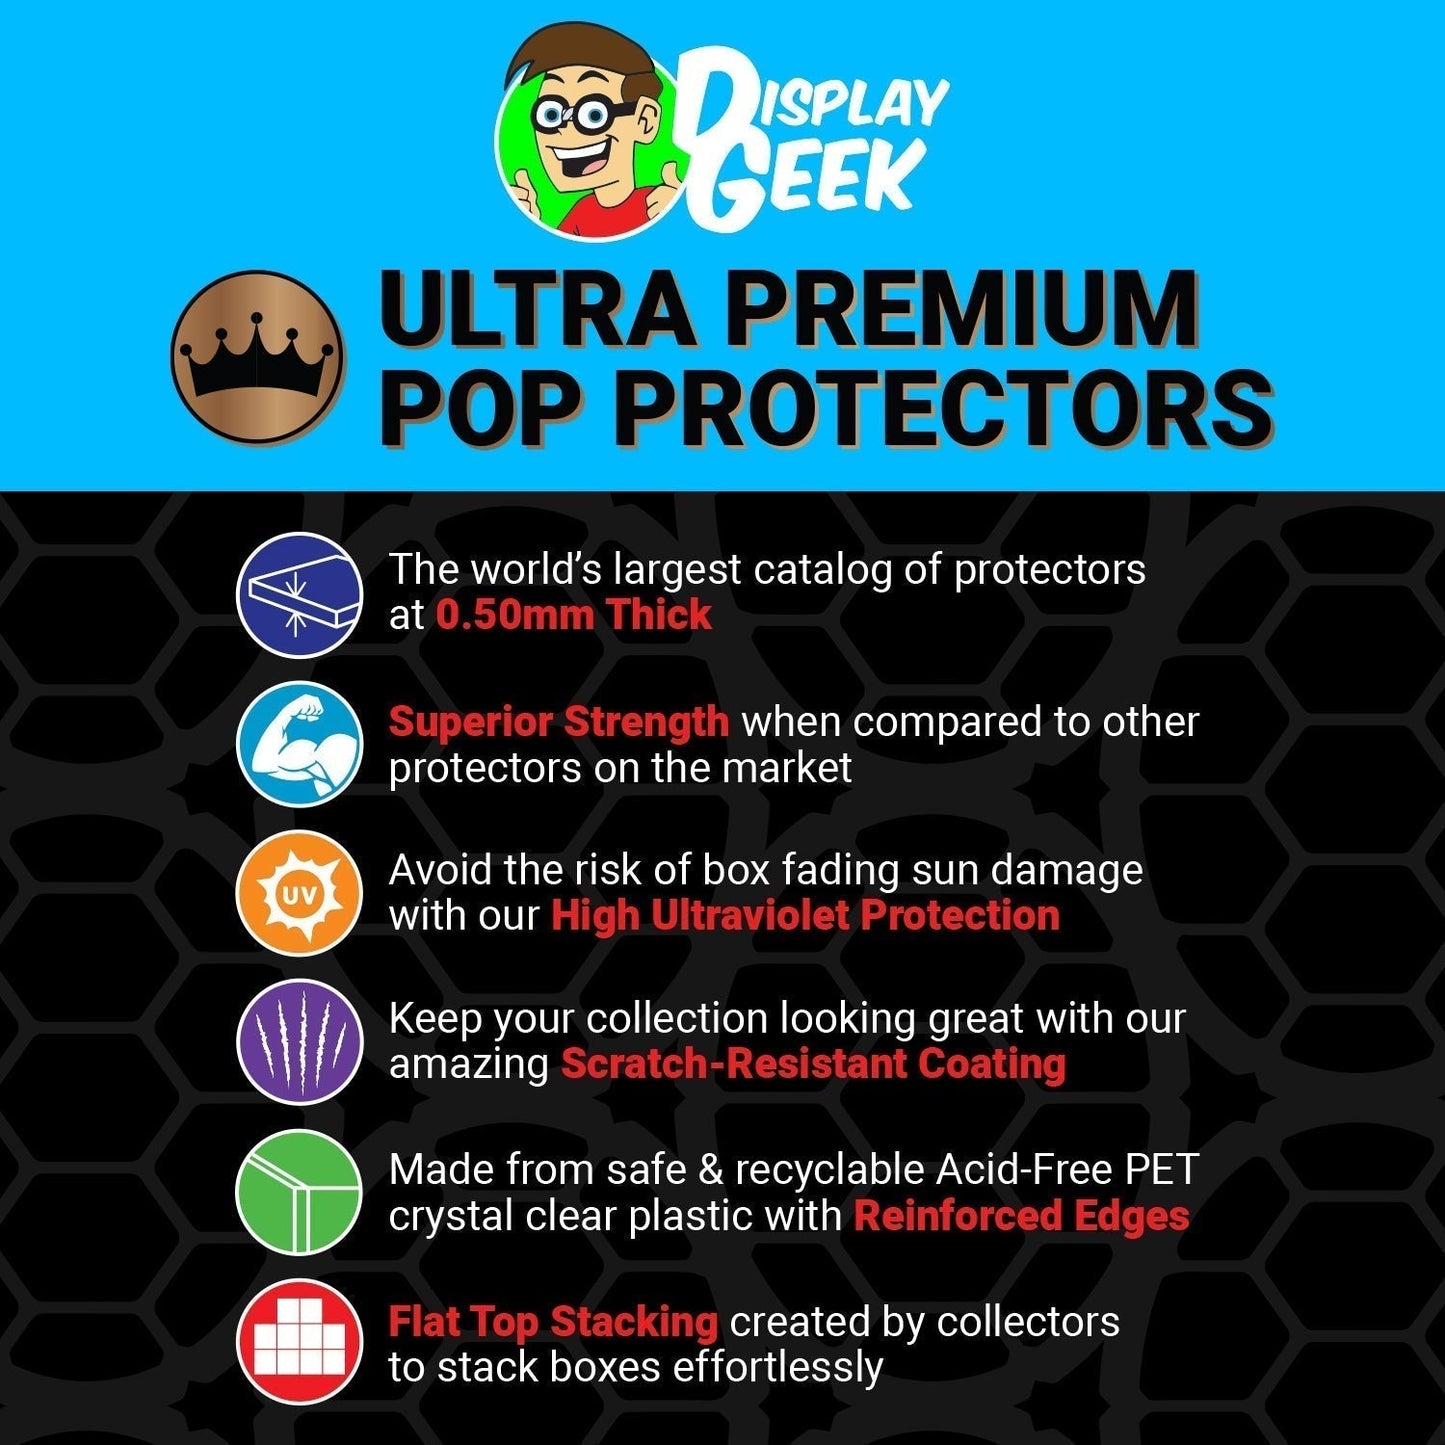 Pop Protector for Bearbrick Blue D-Con FunkO's Cereal Box - PPG Pop Protector Guide Search Created by Display Geek